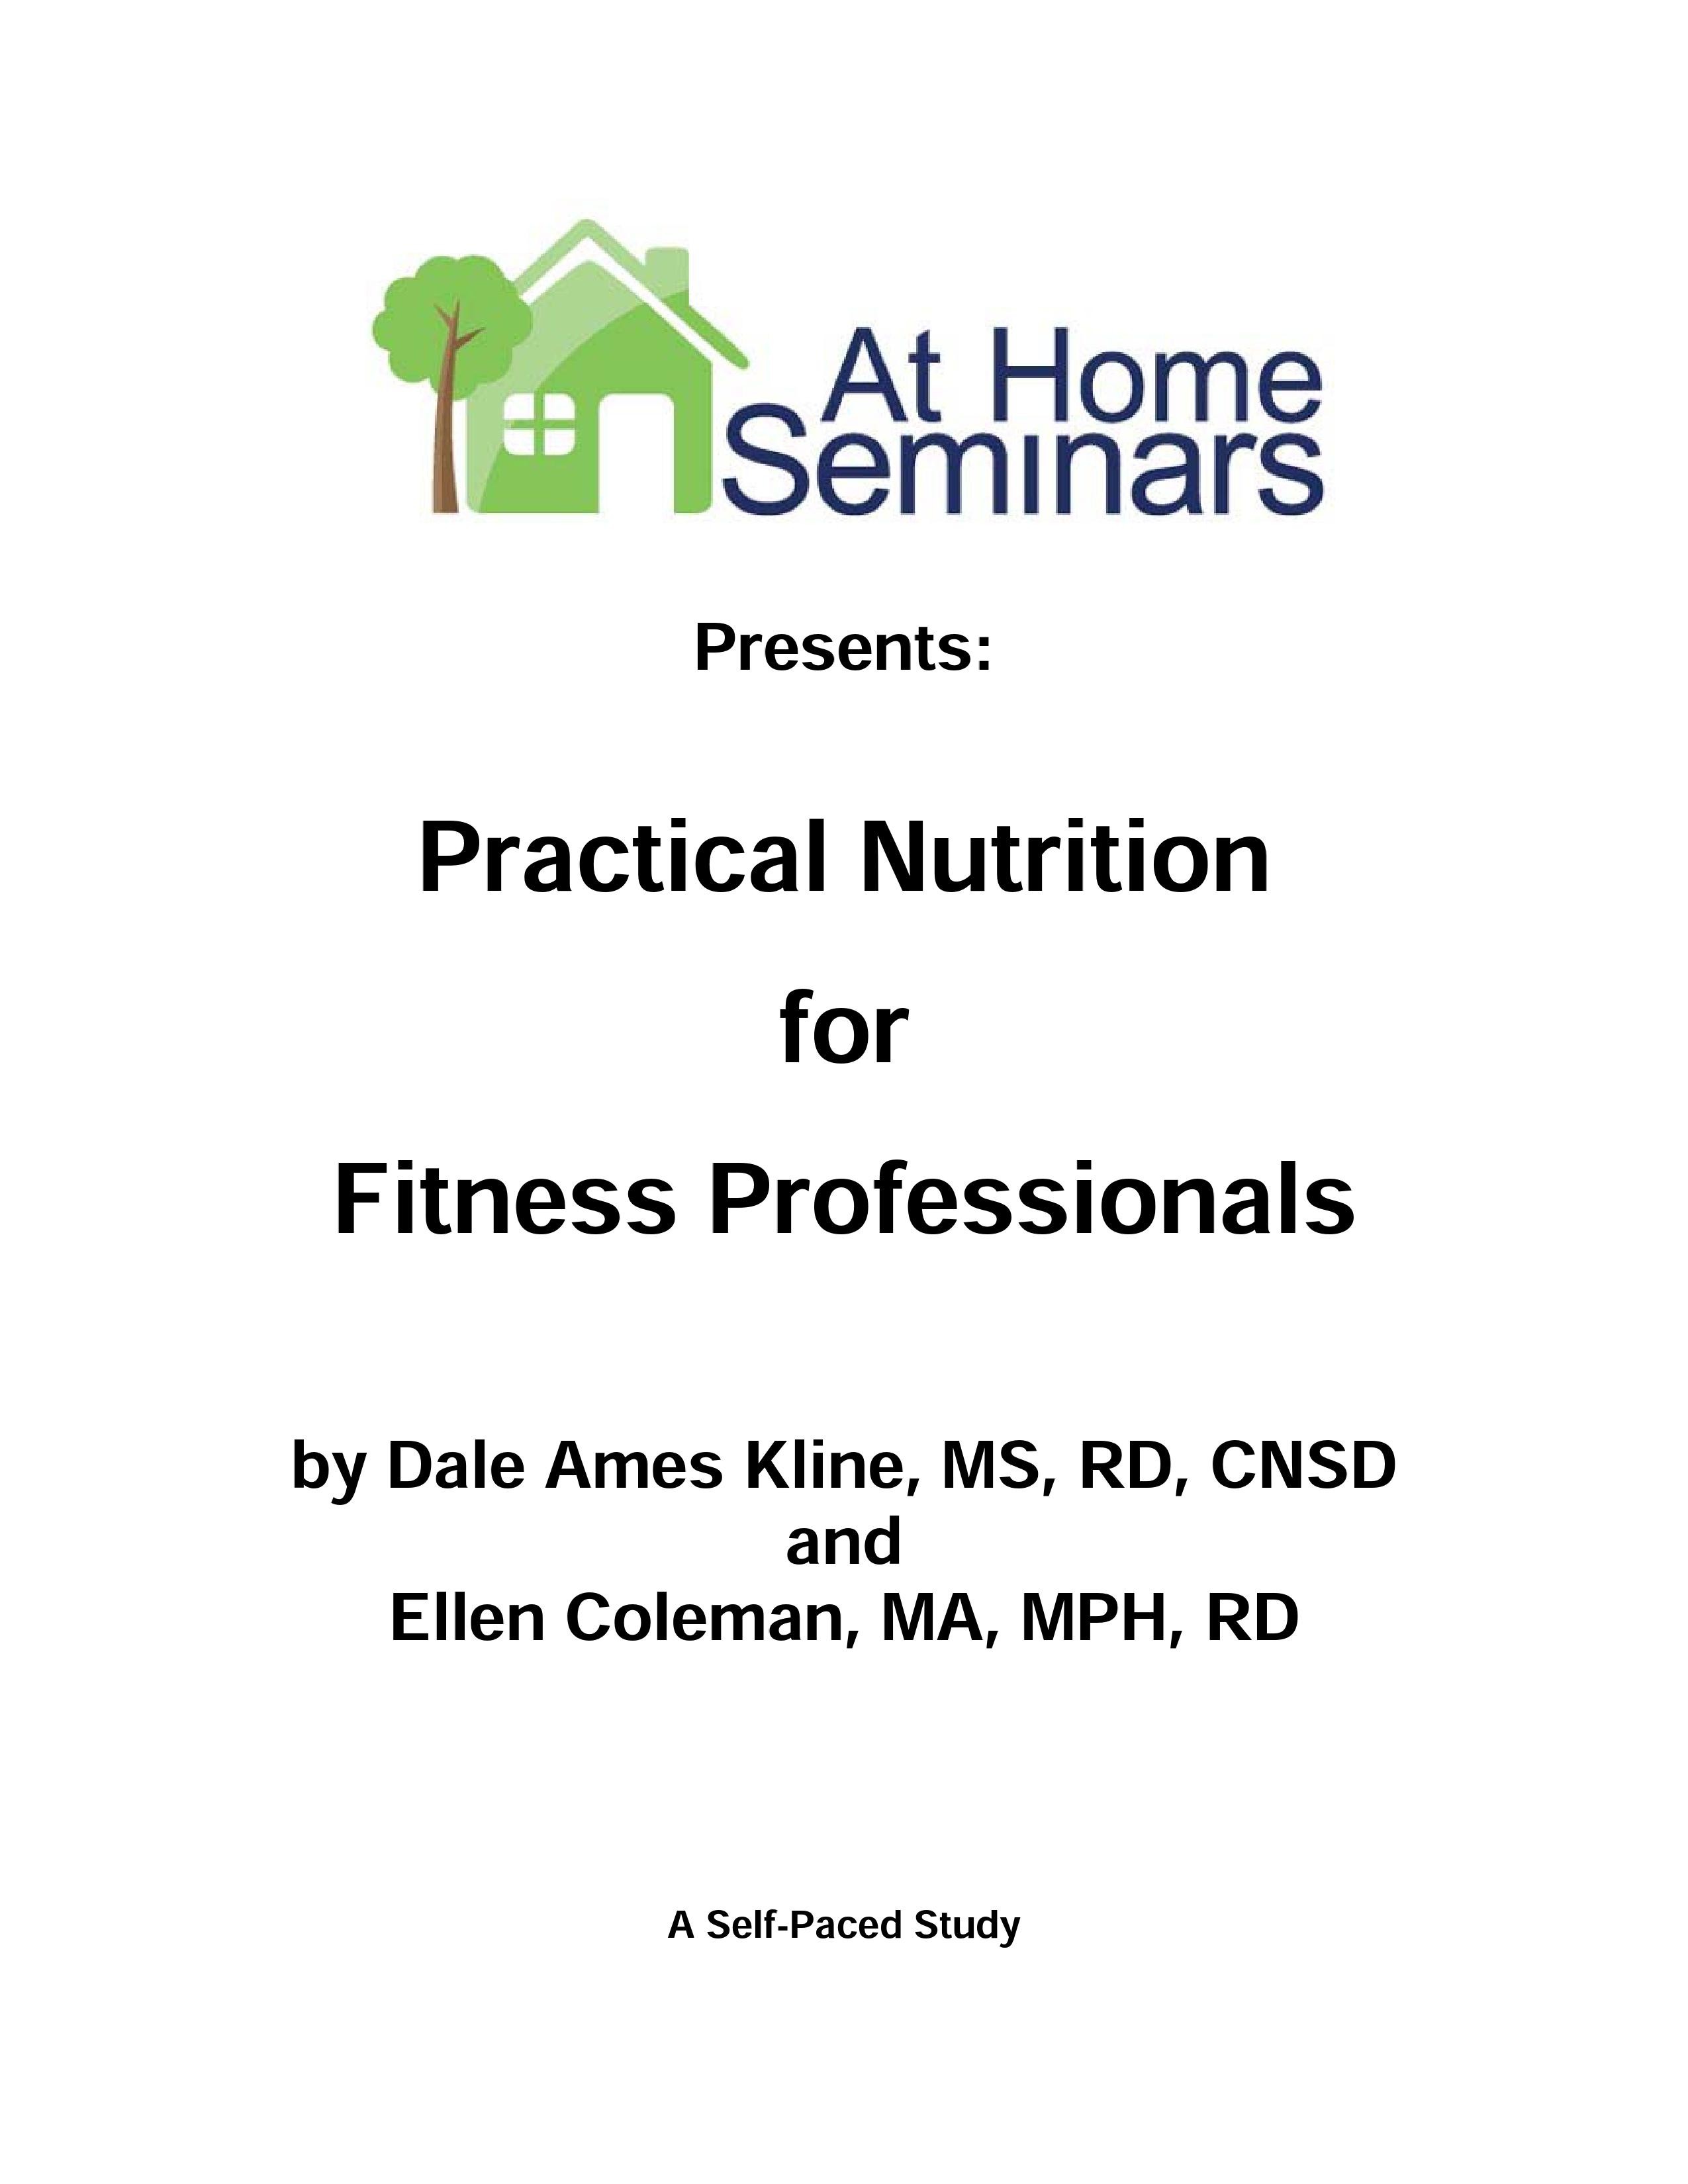 Share a Course: Practical Nutrition for Fitness Professionals (Electronic Download)